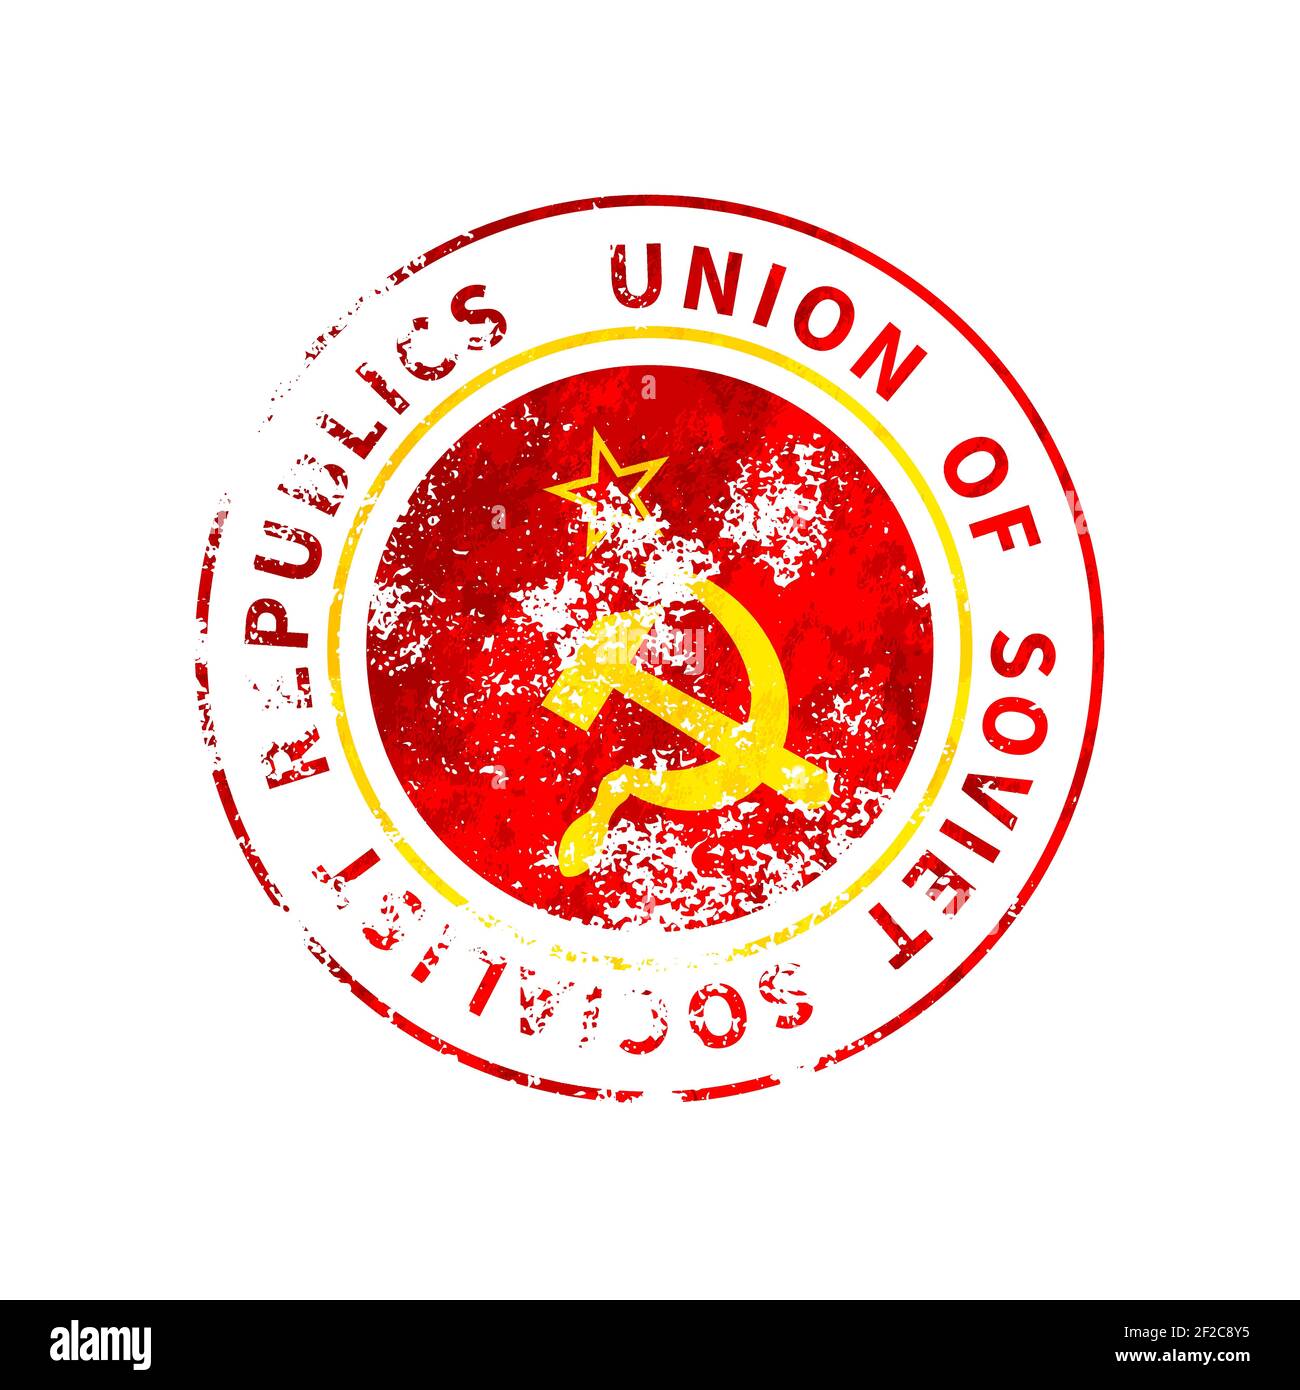 Union of Soviet Socialist Republics sign, vintage grunge imprint with USSR flag on white Stock Vector